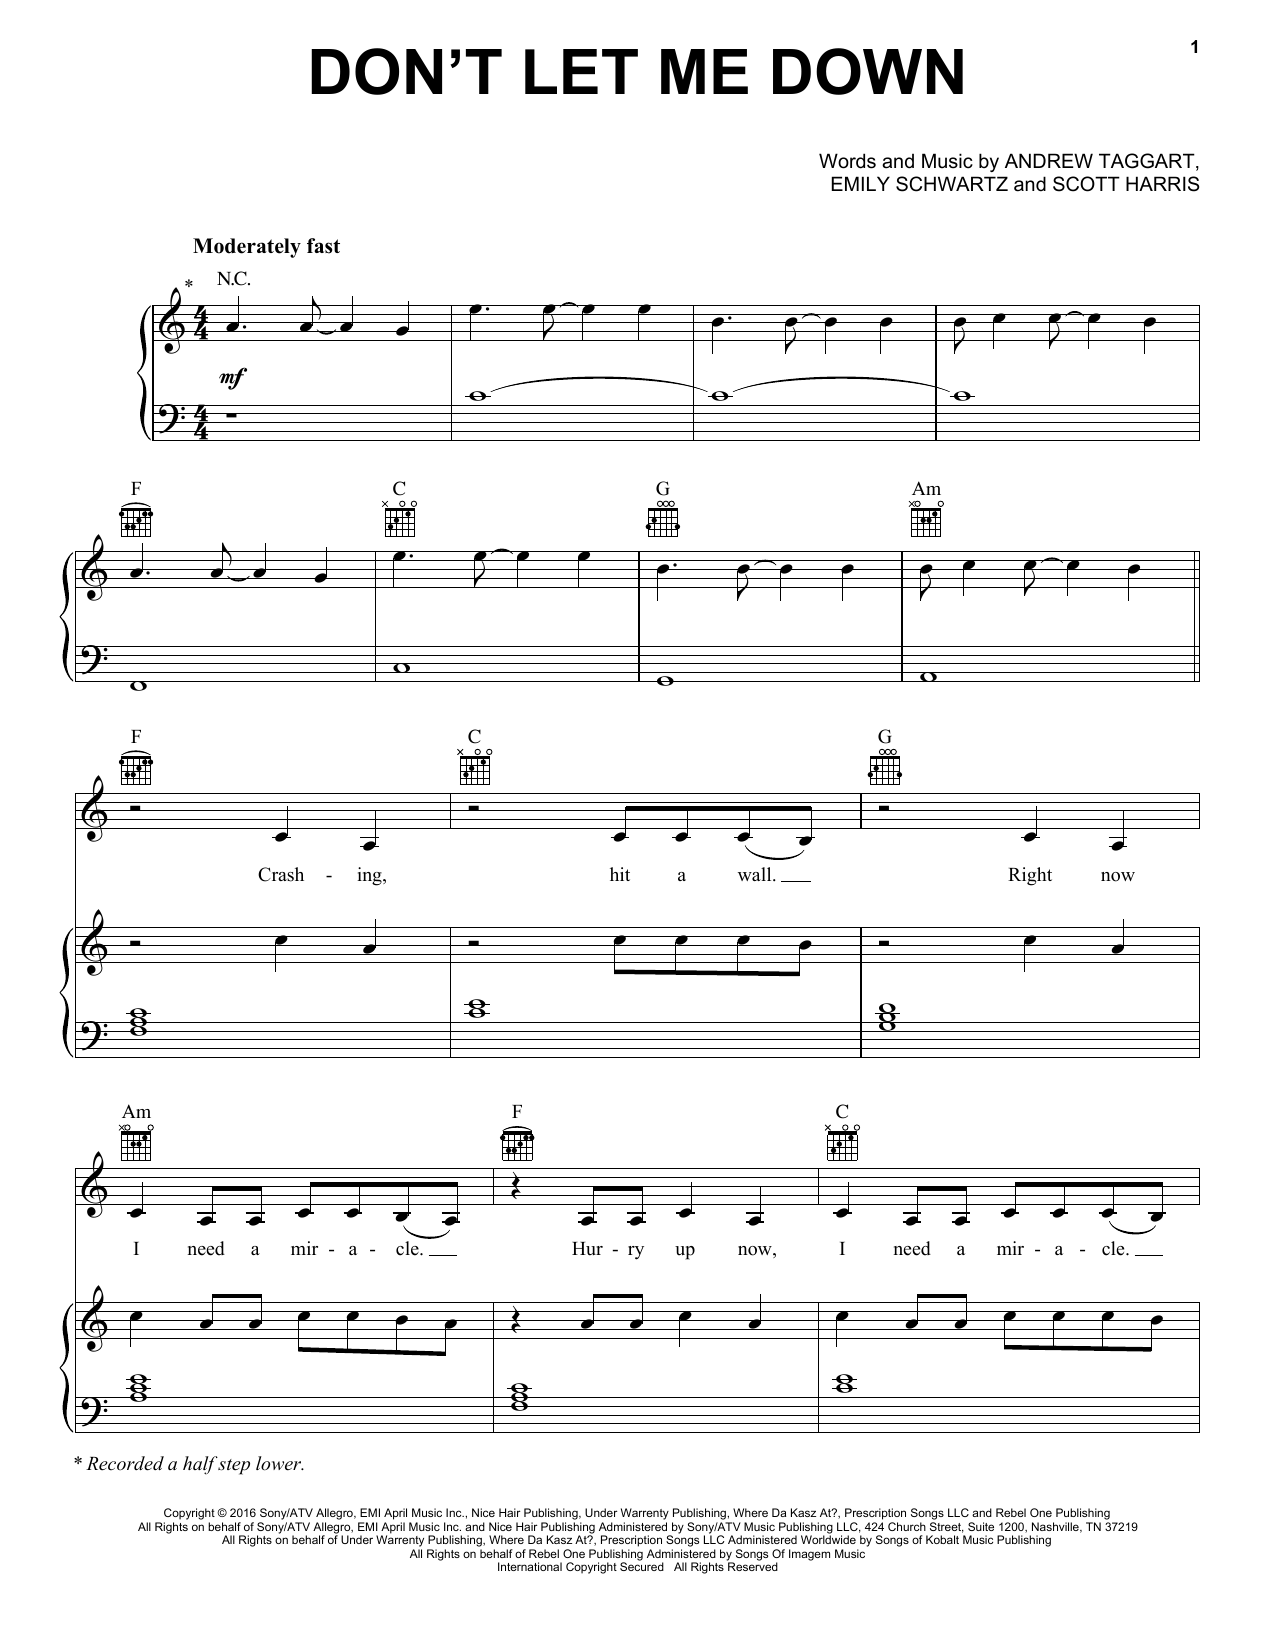 Download The Chainsmokers feat. Daya Don't Let Me Down Sheet Music